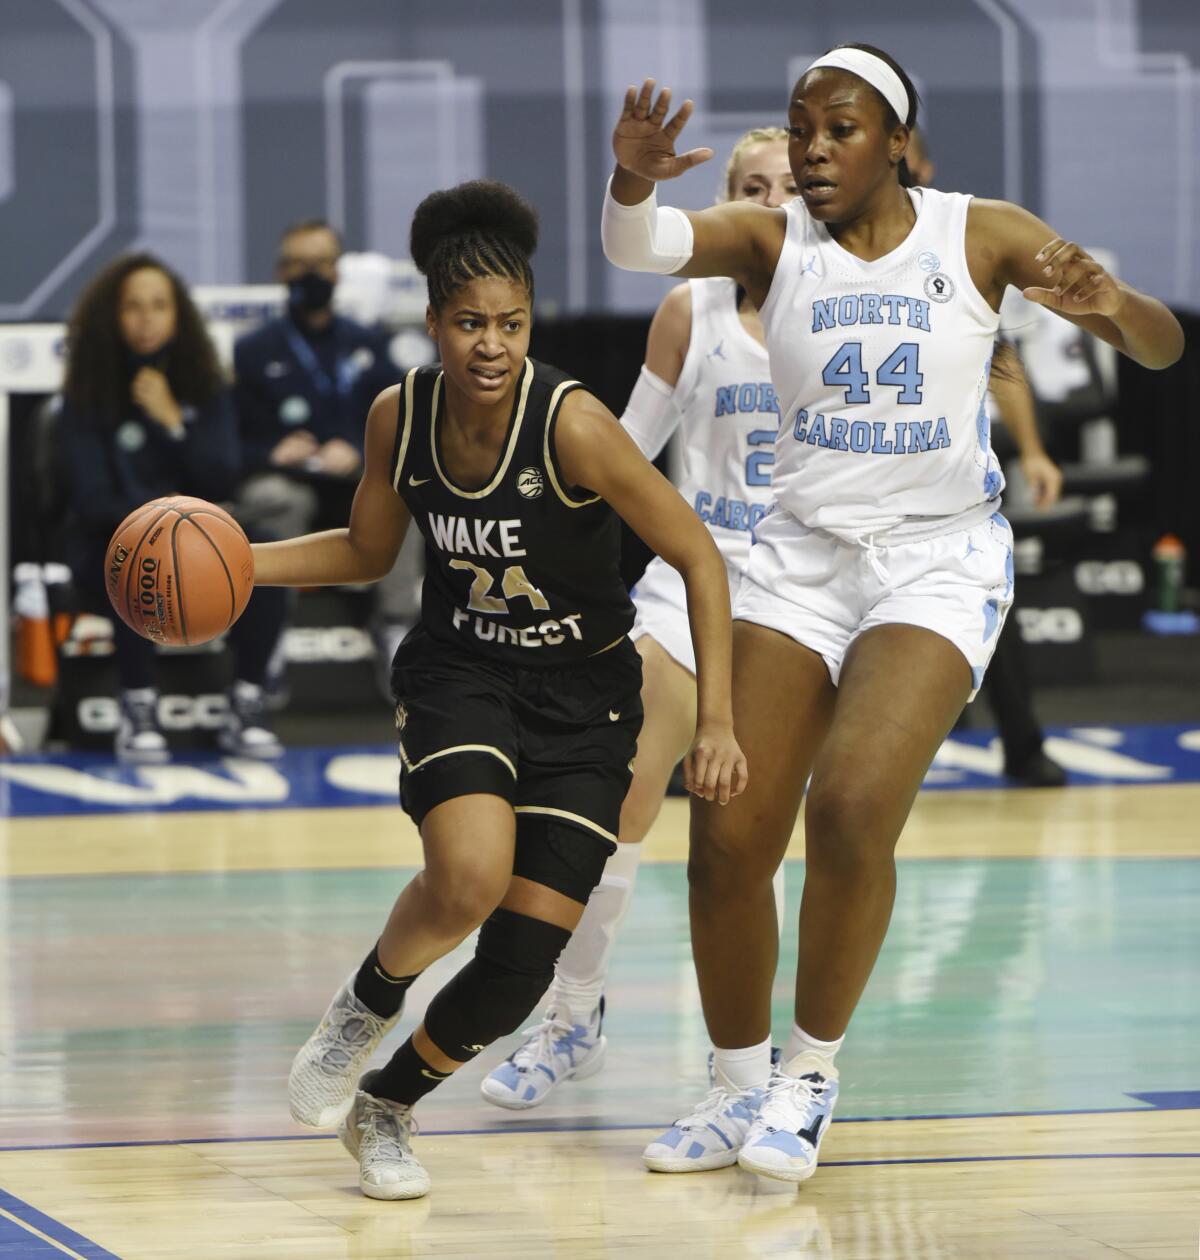 Wake Forest's Jewel Spear drives the baseline past North Carolina's Janelle Bailey during an NCAA college basketball game in the Atlantic Coast Conference tournament, Thursday, March 4, 2021, at the Greensboro Coliseum in Greensboro, N.C. (Walt Unks/The Winston-Salem Journal via AP)